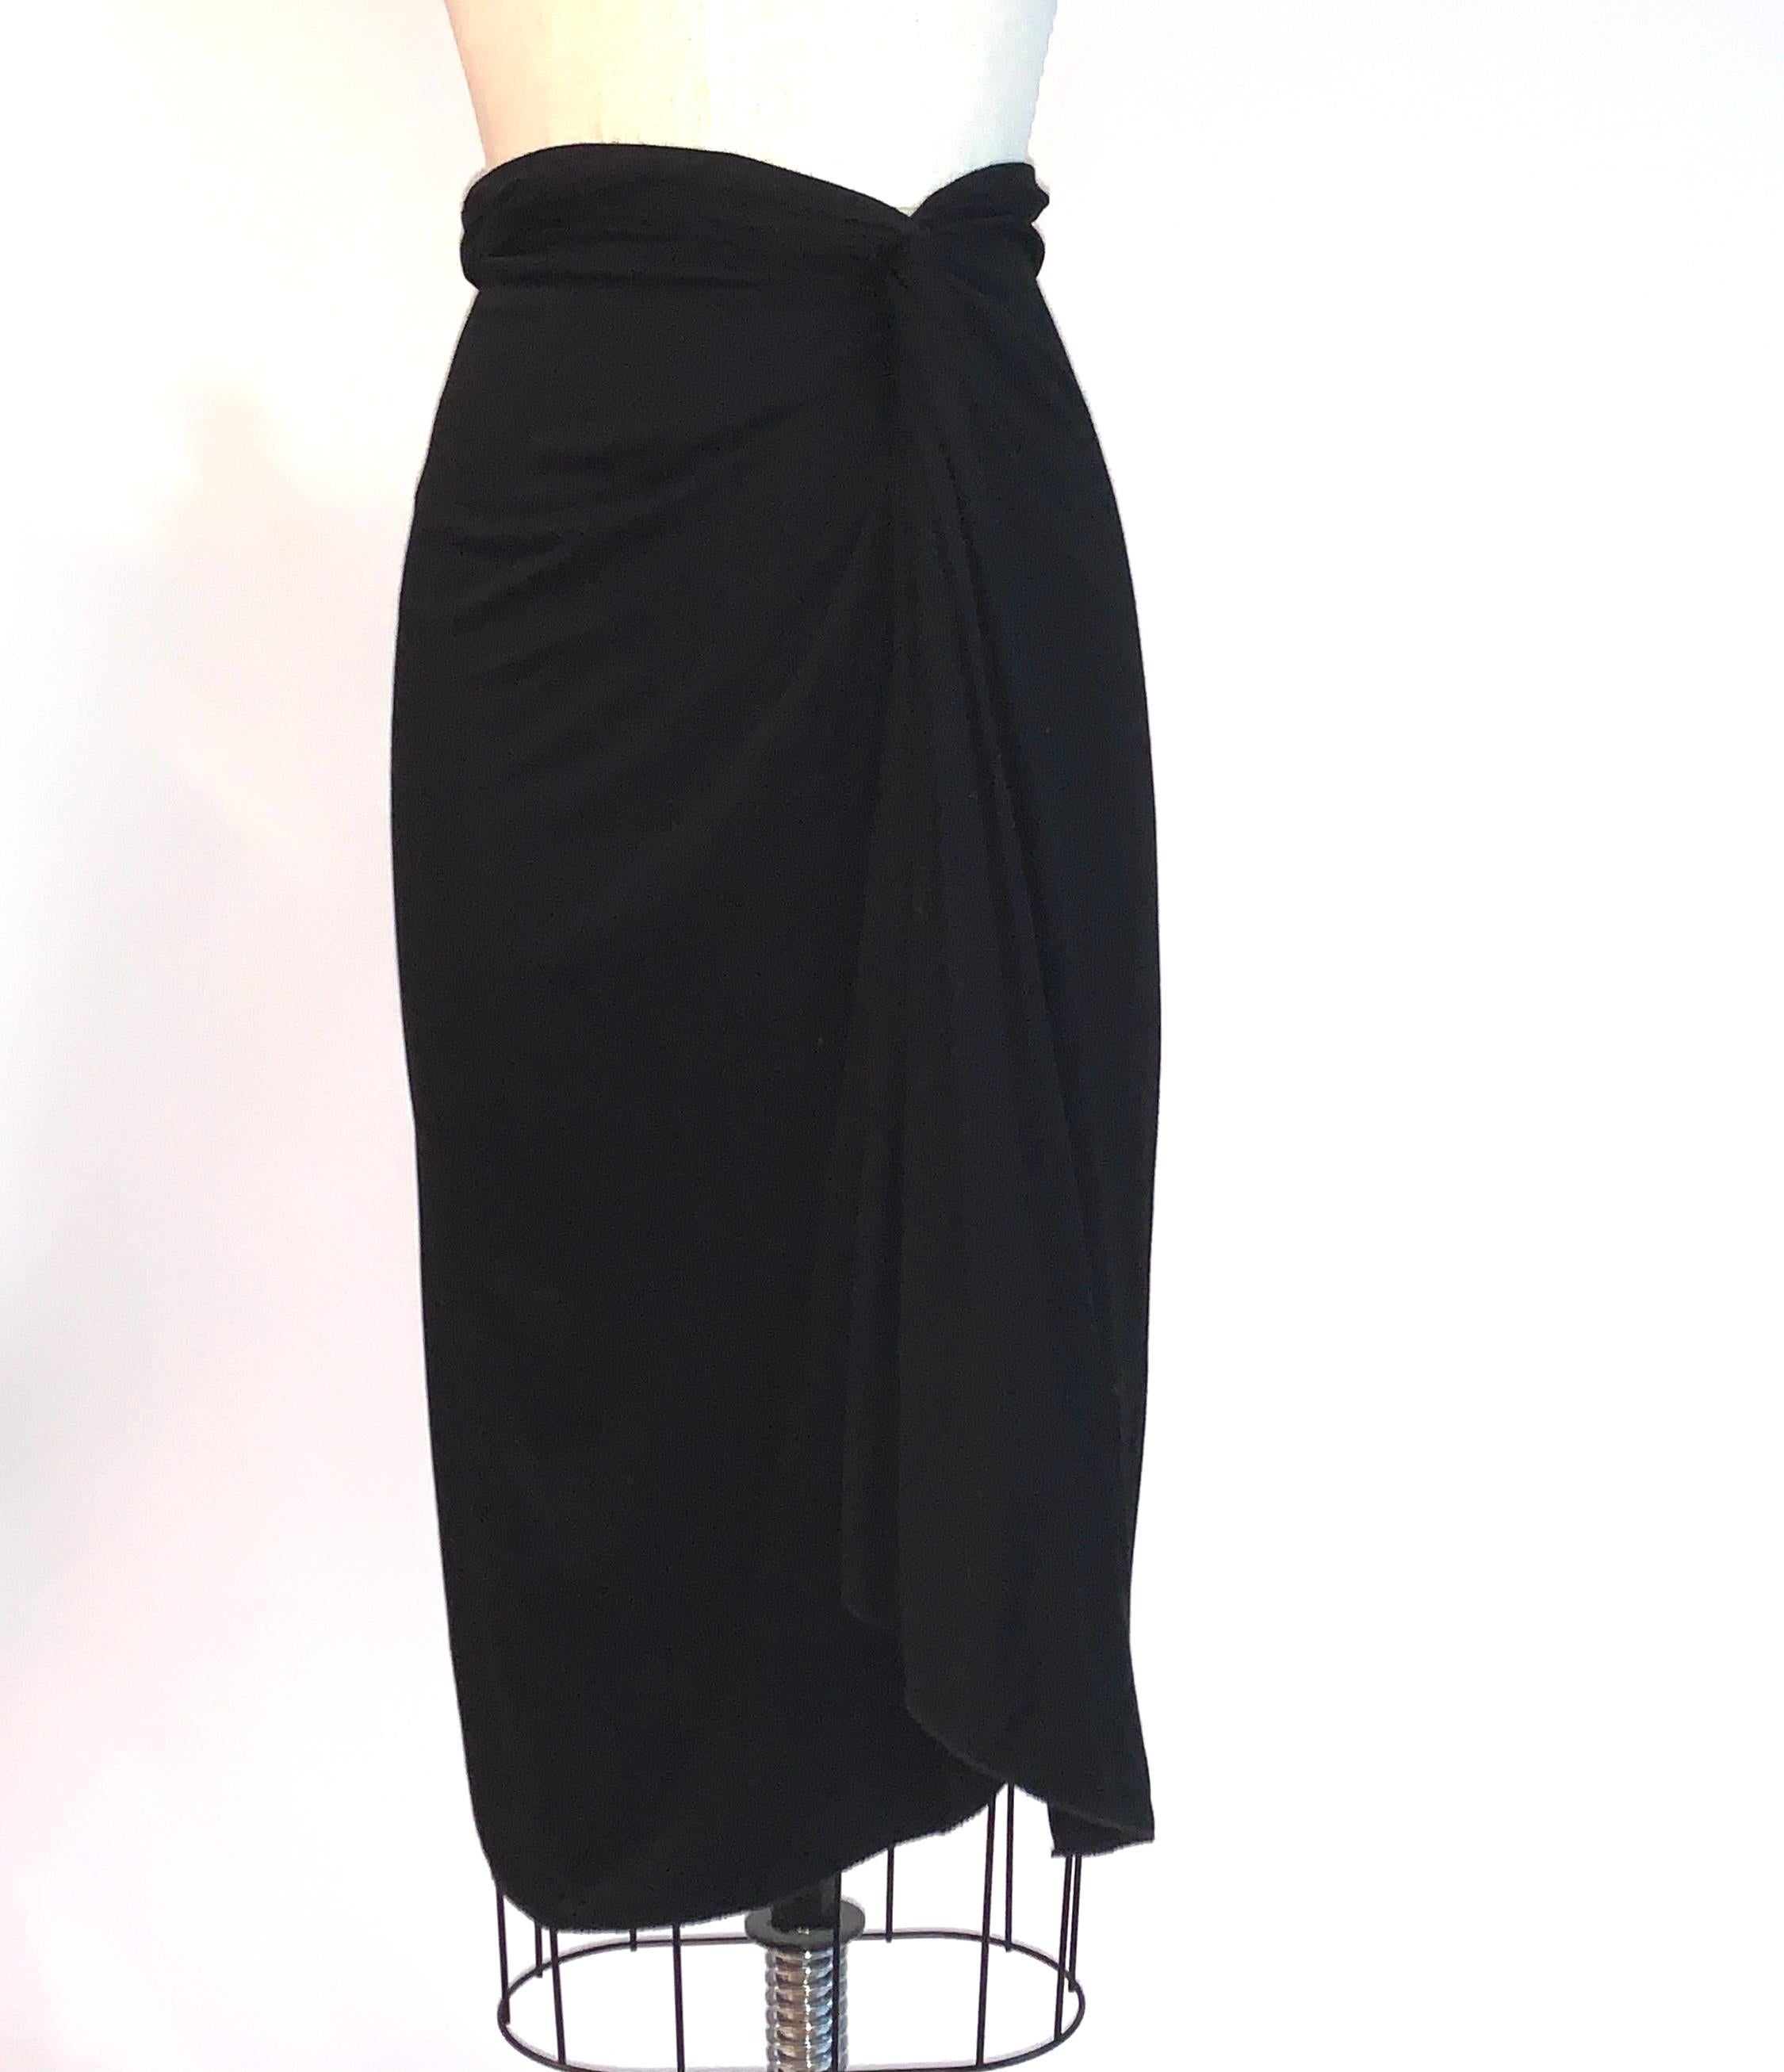 Yves Saint Laurent black matte jersey pencil skirt with great twist and drape detailing at front side waist. Soft, comfy, and very versatile! Back zip and hook and eye.

100% viscose. (Unlined.)

Made in Italy. 

Size IT 40, best fits US 2/4, see